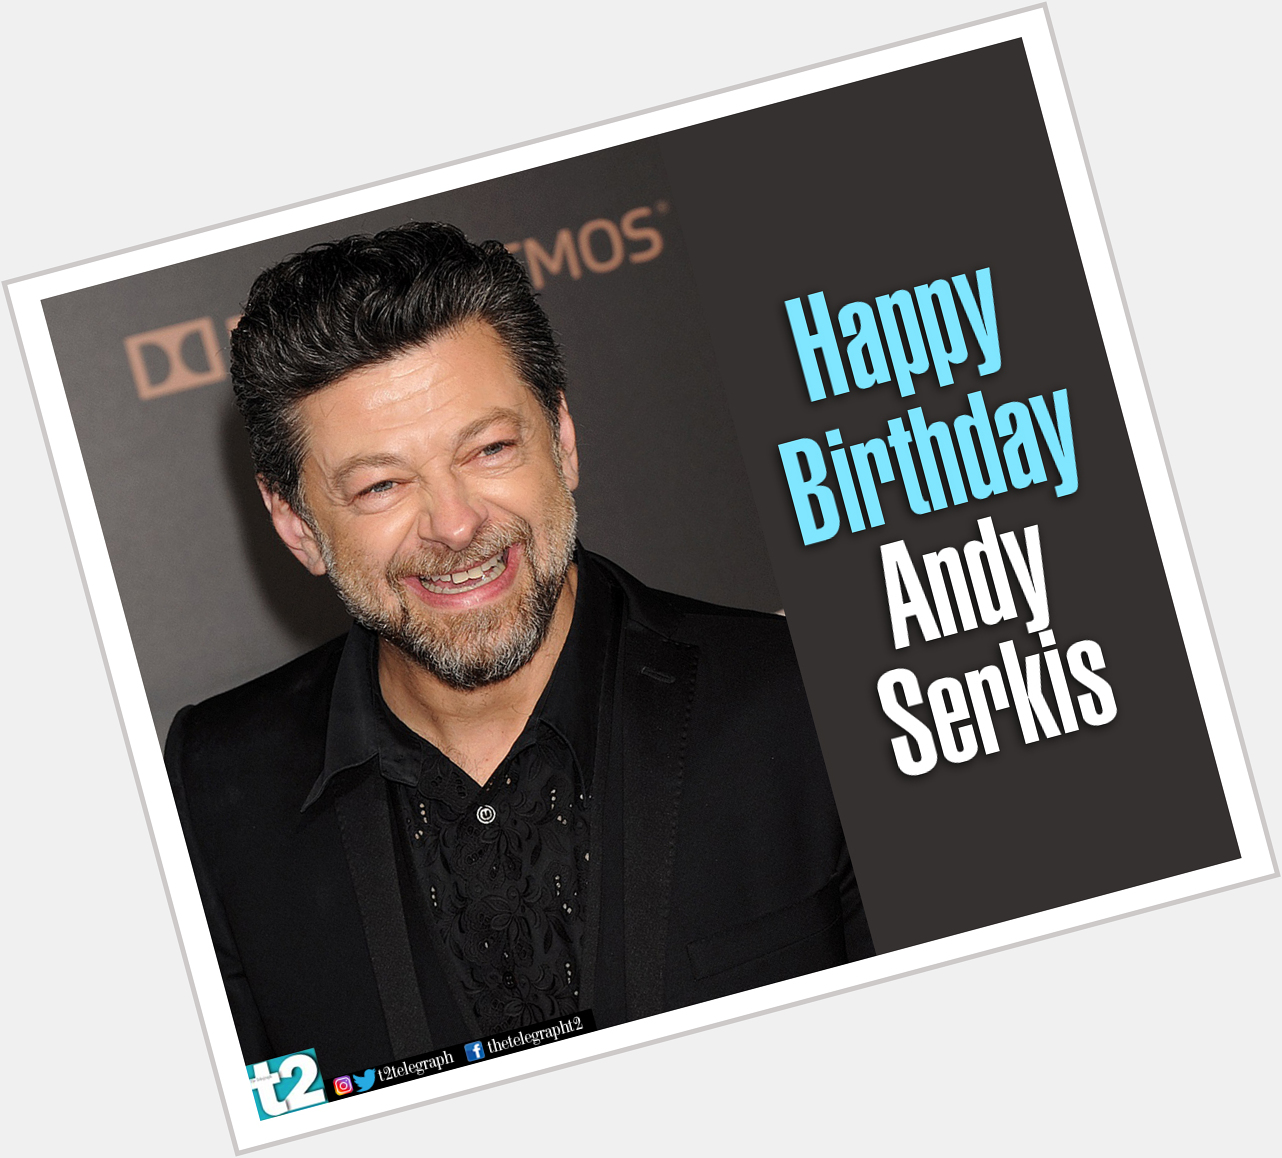 He is the master of the art of performance capture. t2 wishes Andy Serkis a very happy birthday! 